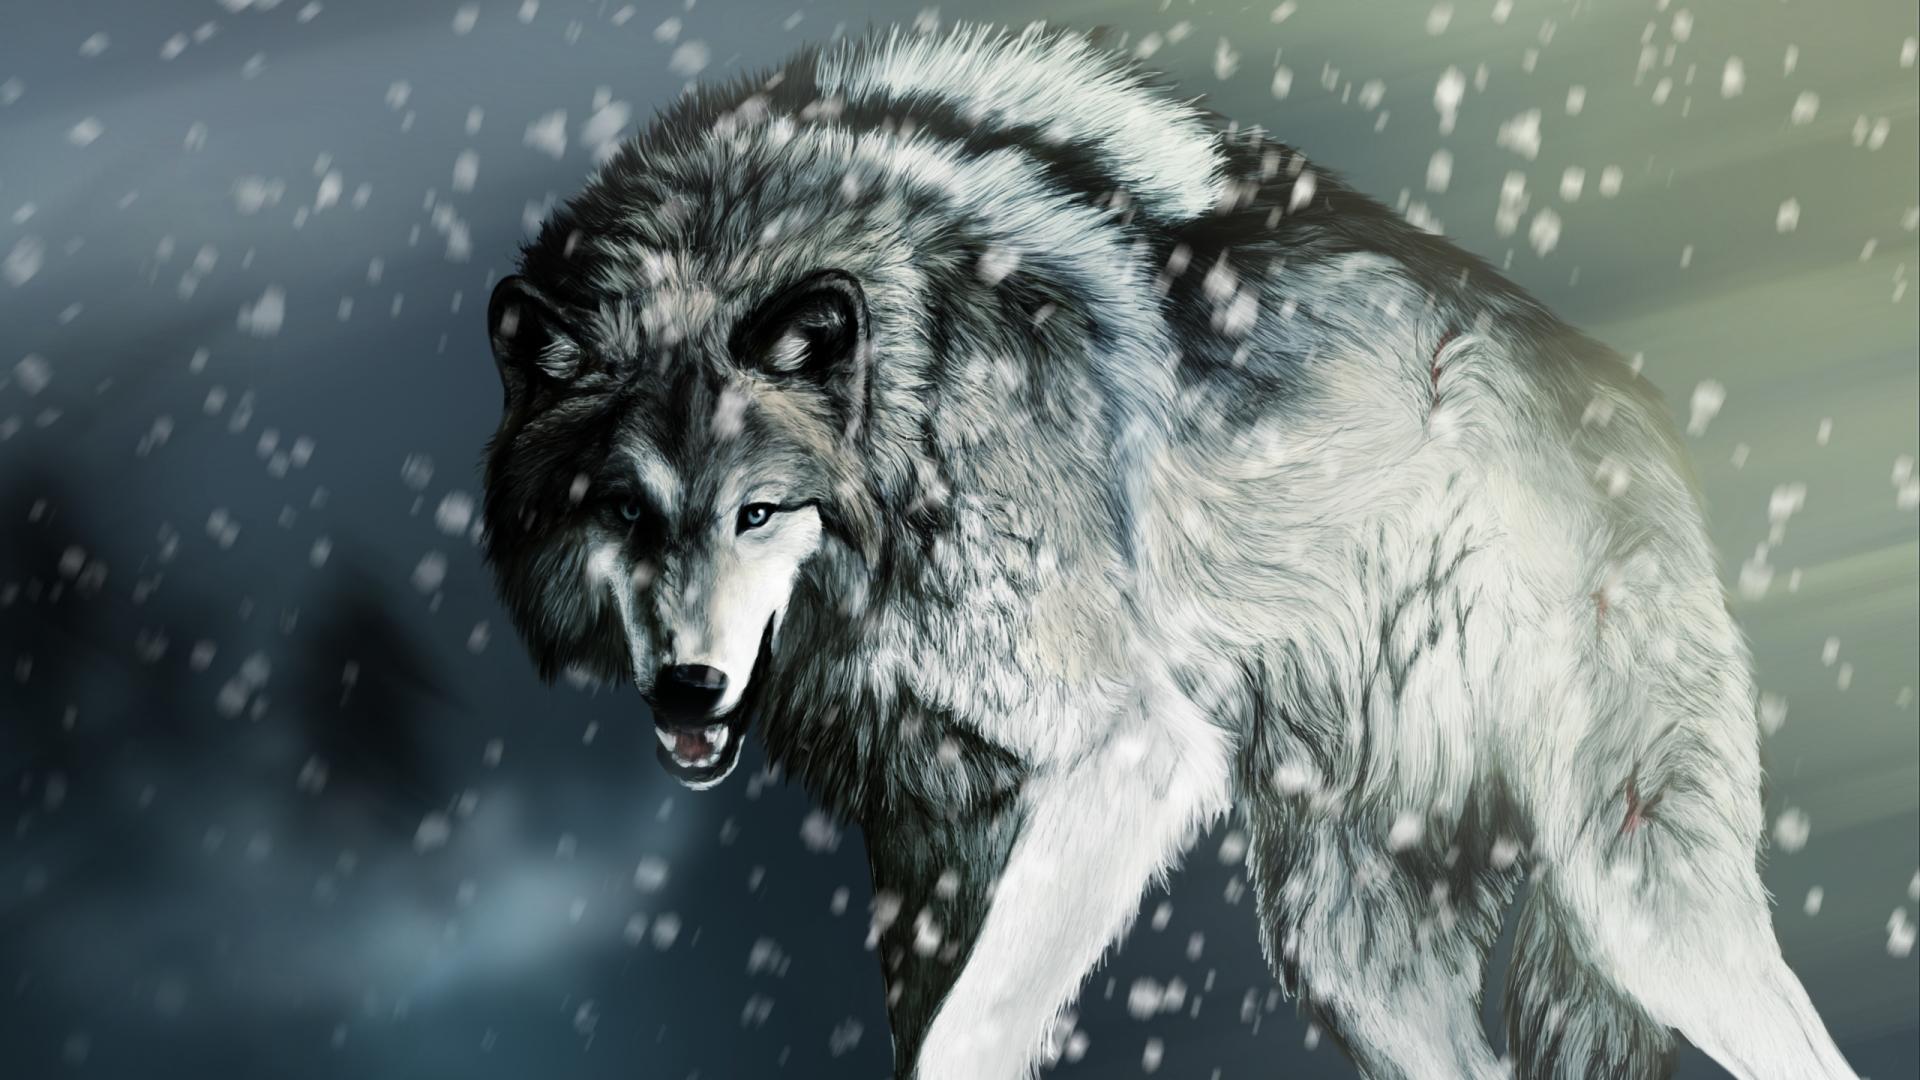 Gray Wolf Wallpaper, FSX52 HDQ Cover Wallpaper For Desktop And Mobile